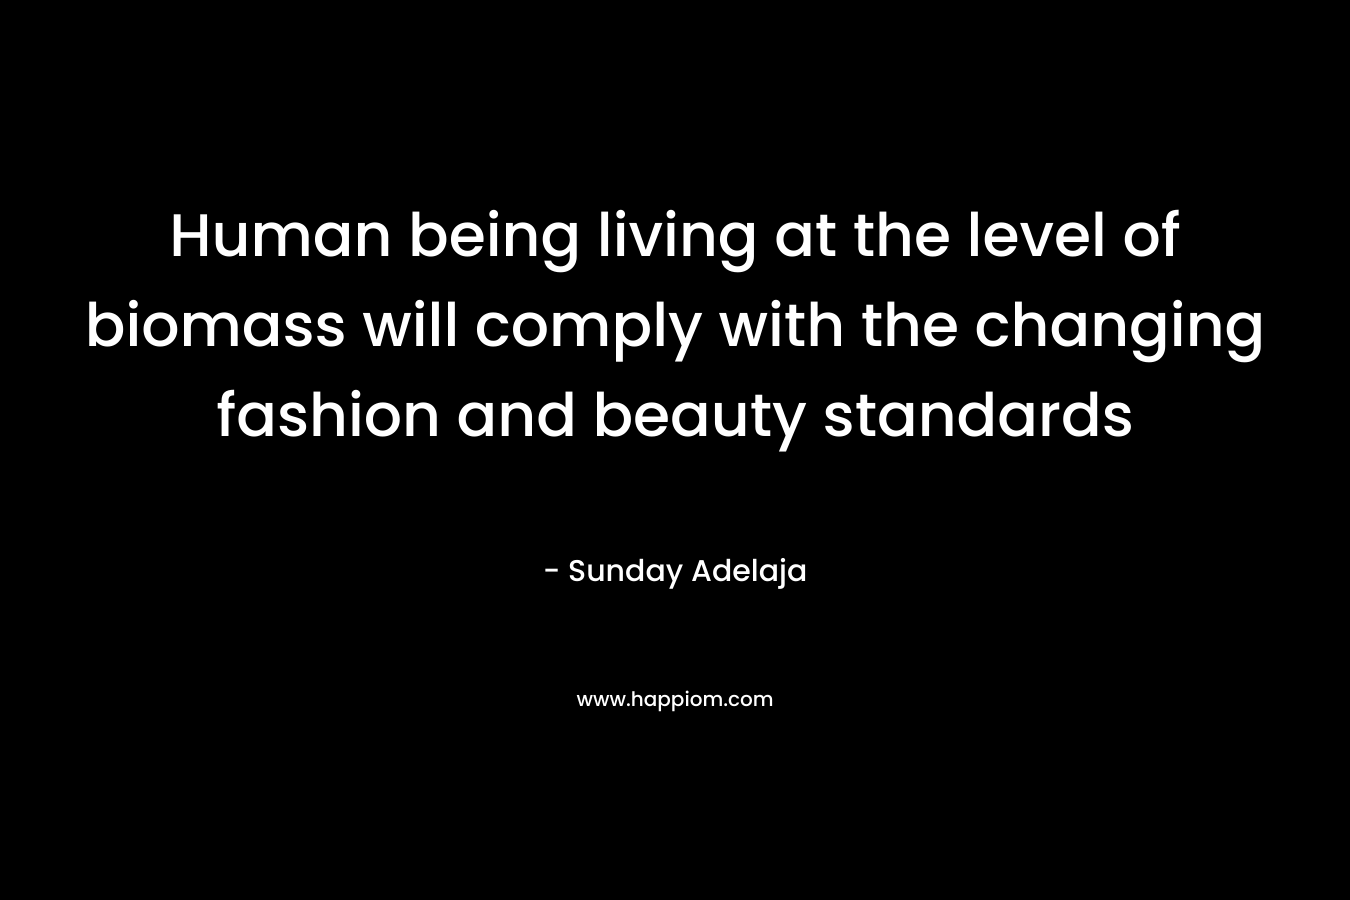 Human being living at the level of biomass will comply with the changing fashion and beauty standards – Sunday Adelaja